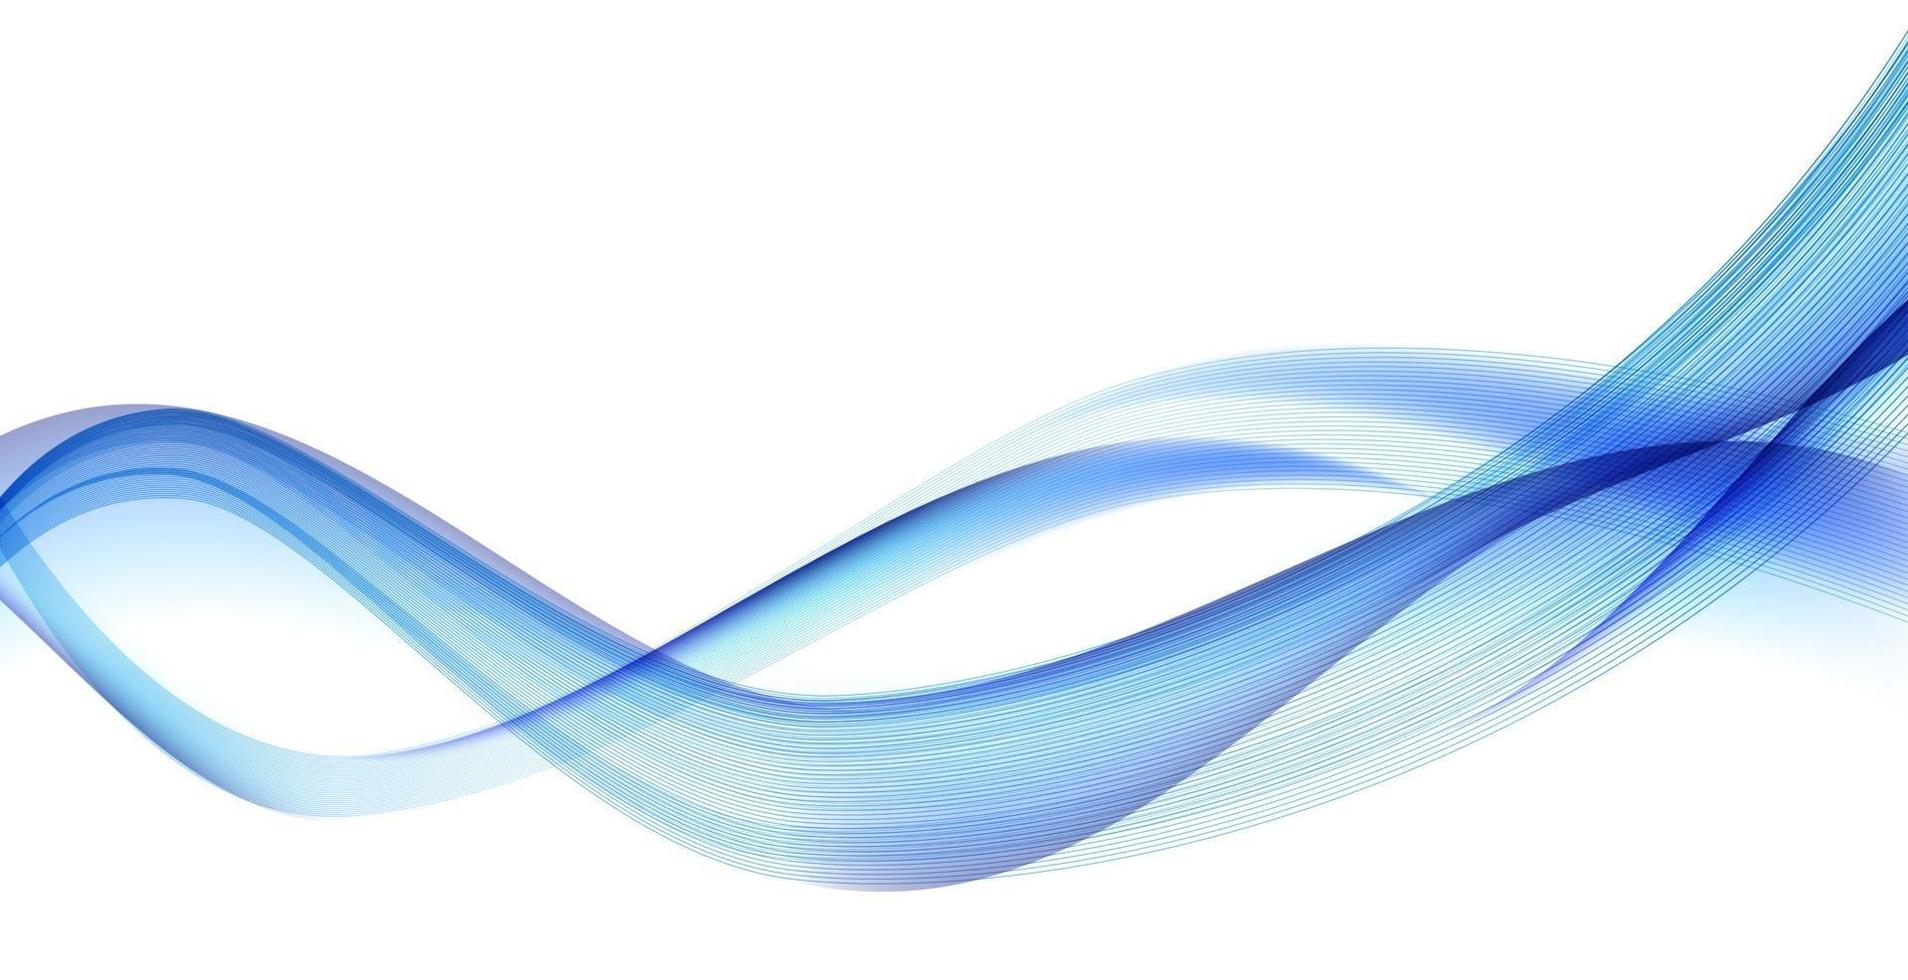 Abstract Wave Set on White Background. Vector Illustration.